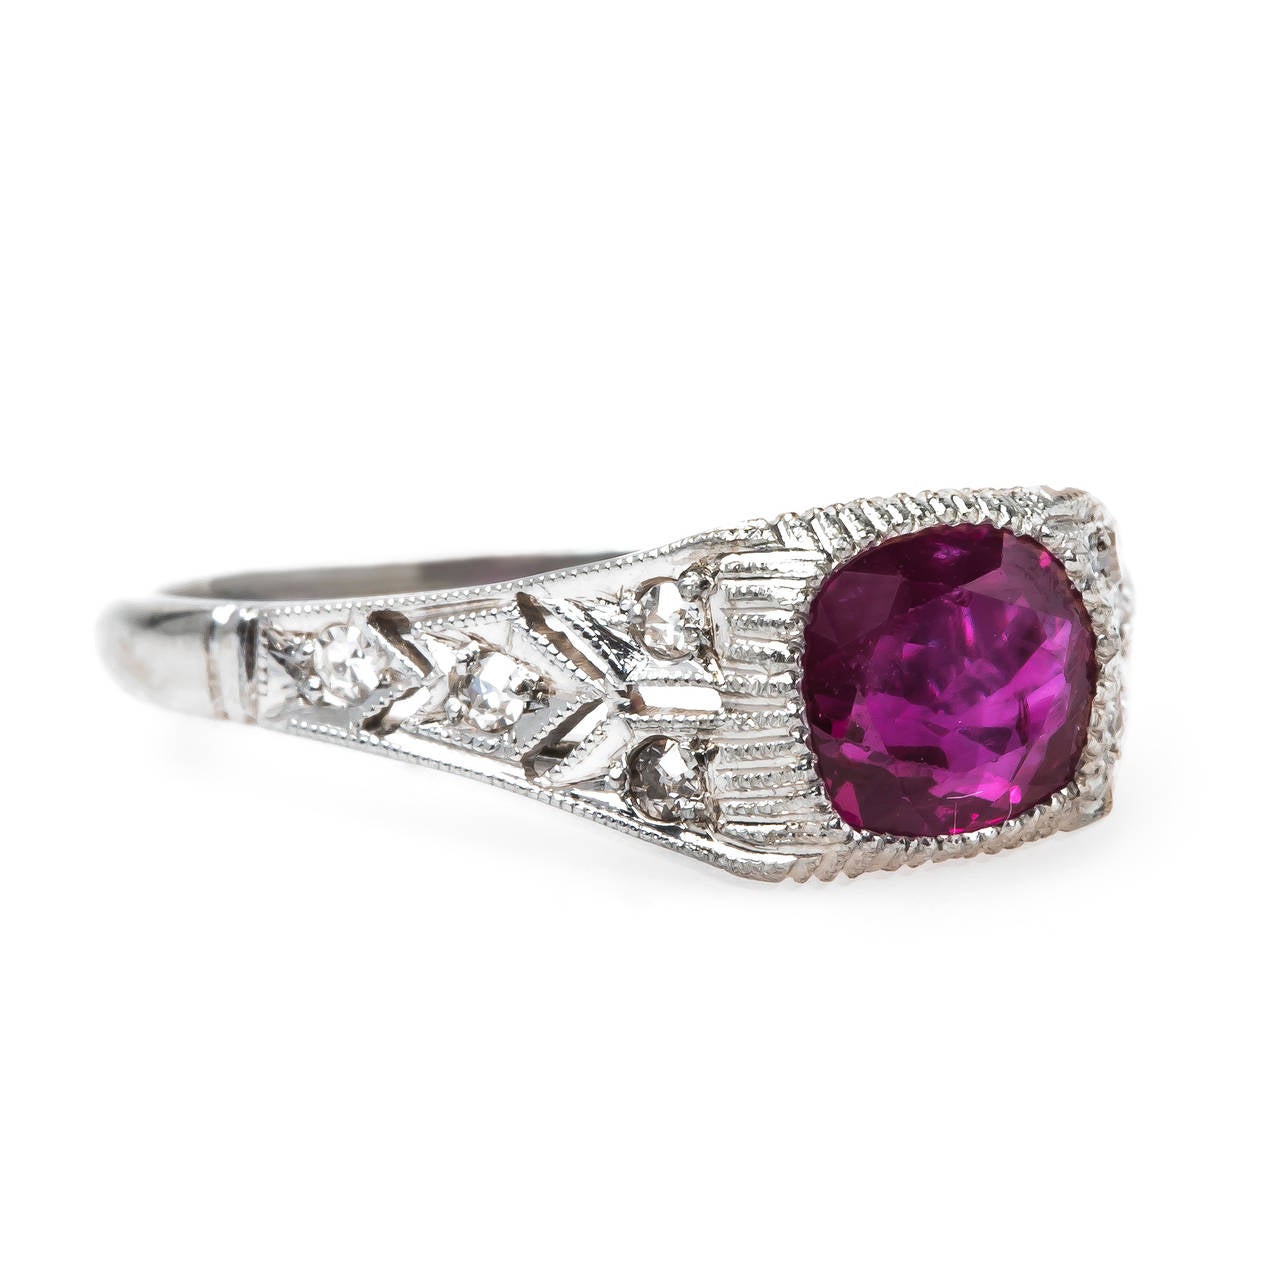 Madeira is a cheerful authentic Art Deco platinum ring centering a ruby weighing exactly 1.31cts accompanied by a Guild Laboratories certificate stating the ruby is heated with a Burma origin. This deep red ruby is bezel set within an angular bombe